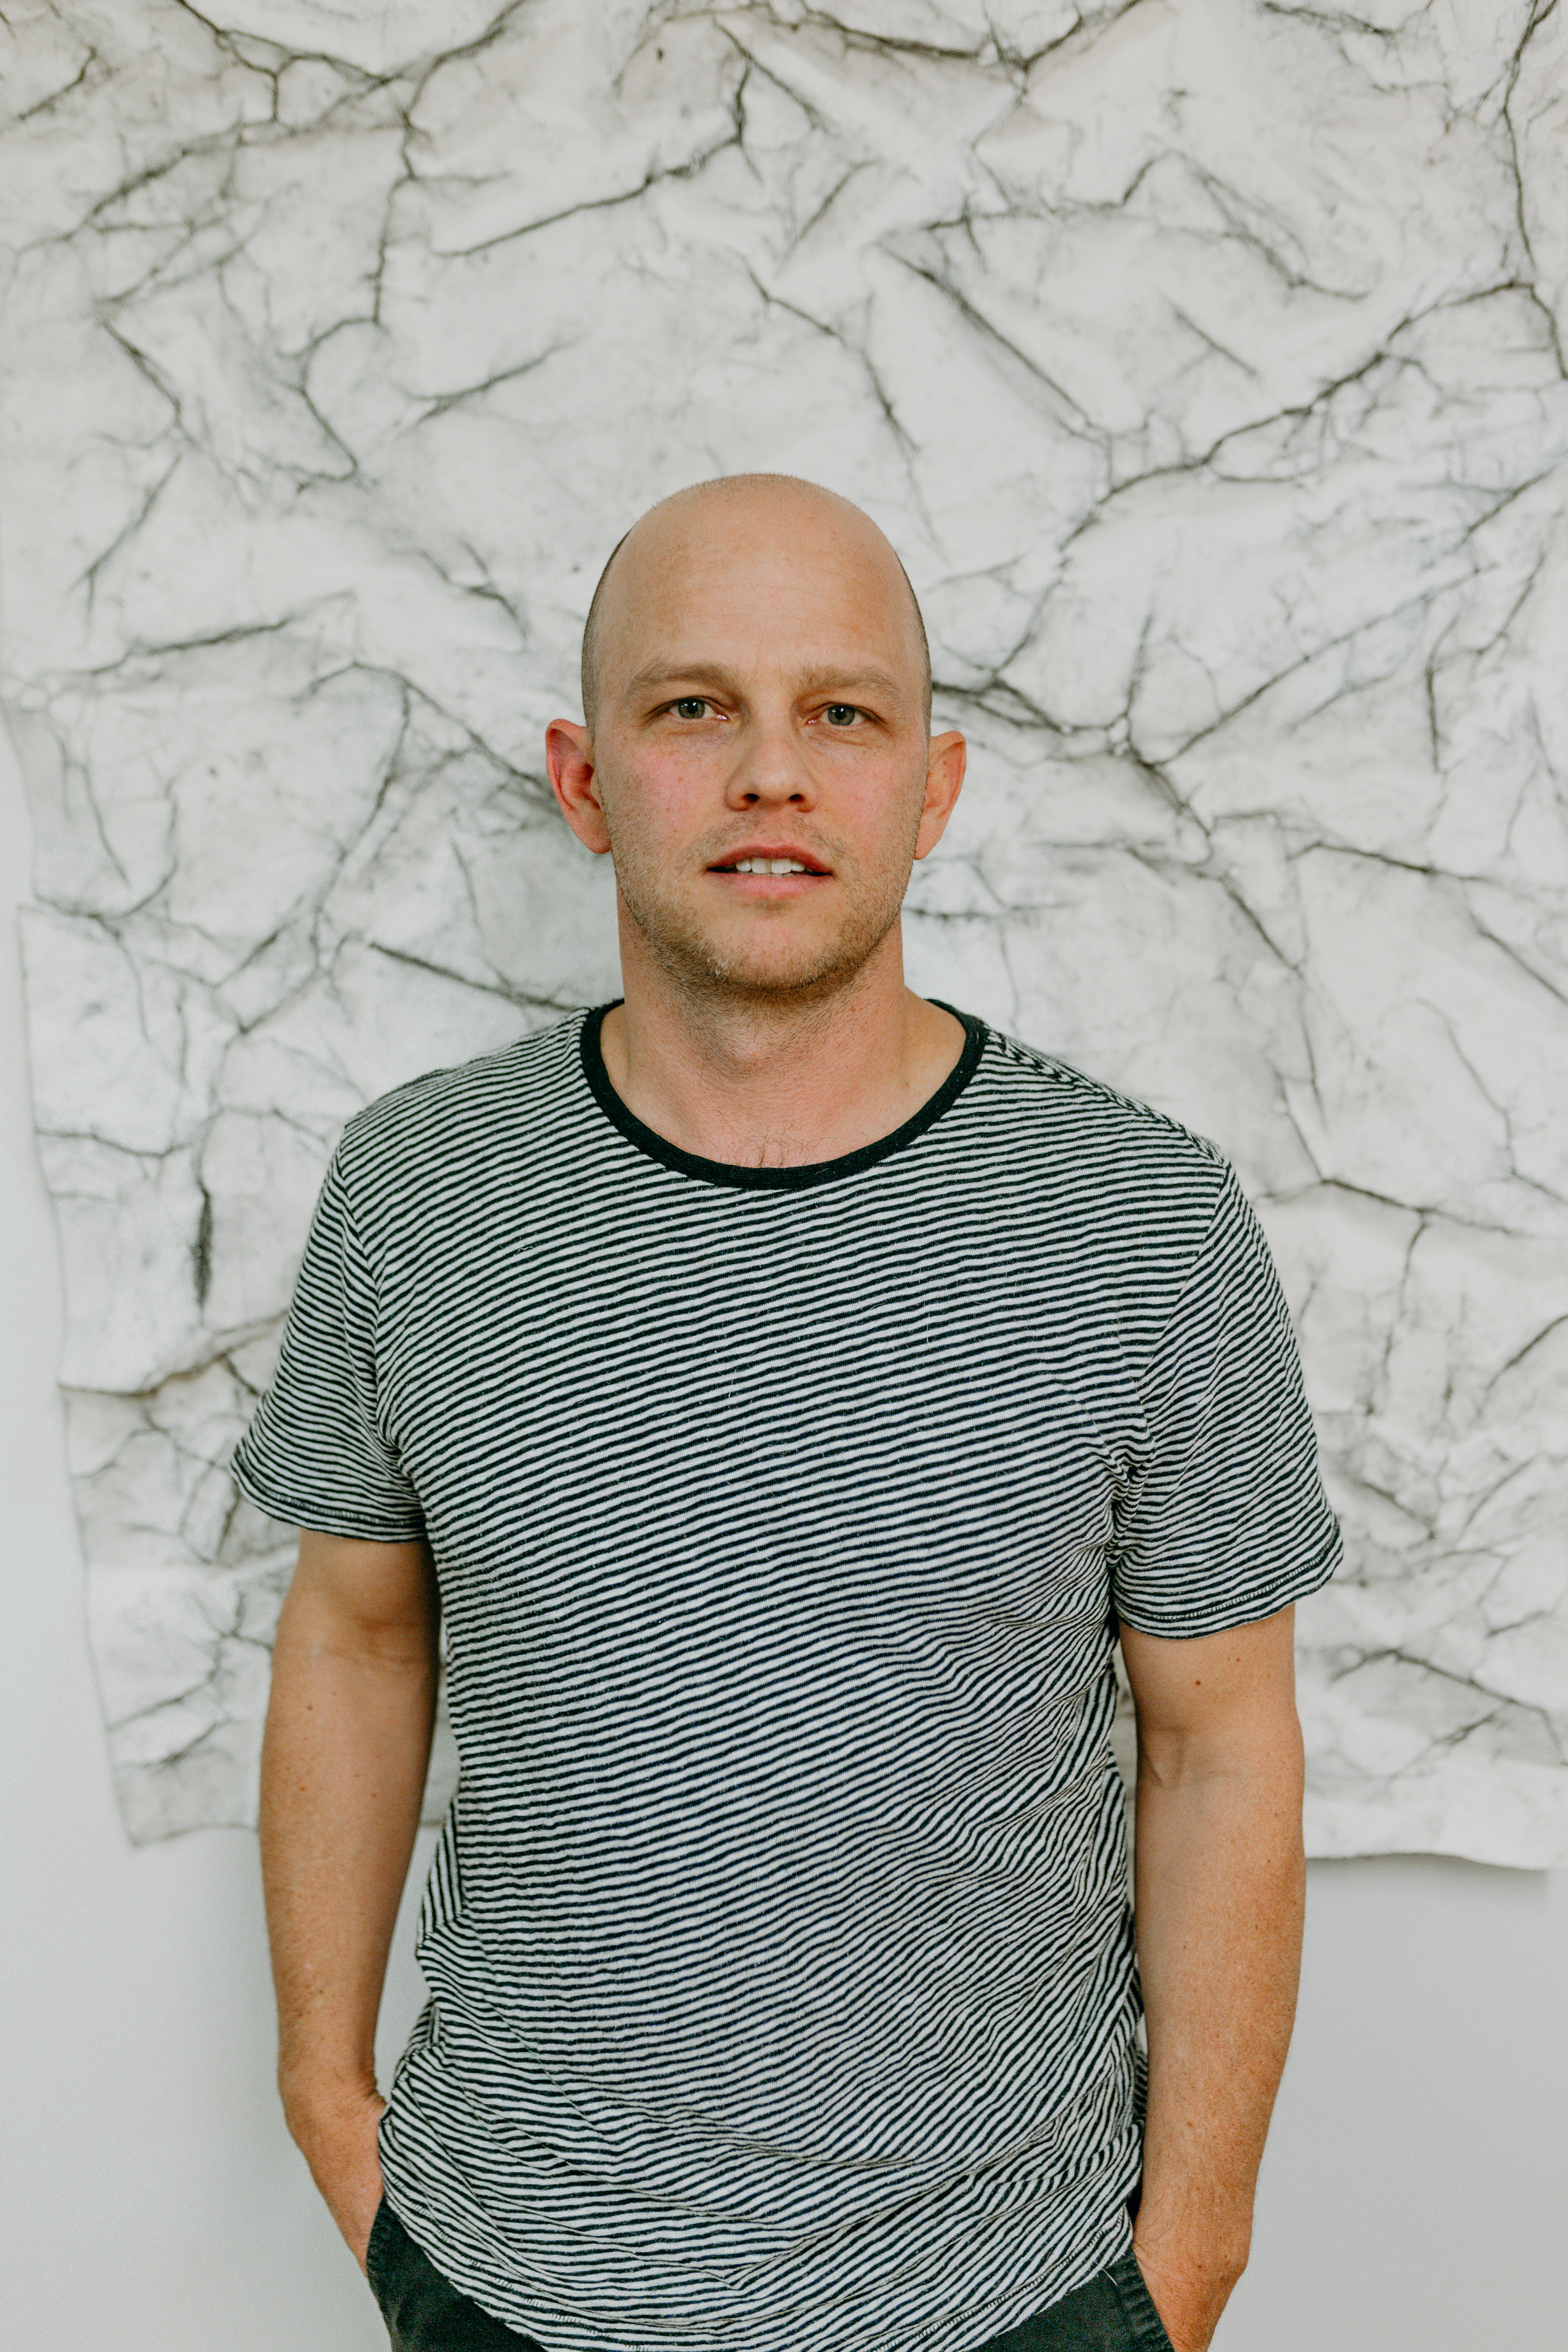 Portrait of Chris Oatey in front of an abstract background resembling white cracked earth. He is bald, wears a black and white striped t-shirt. His hands are in his pockets and he looks neutrally into the camera with his mouth slightly open. 